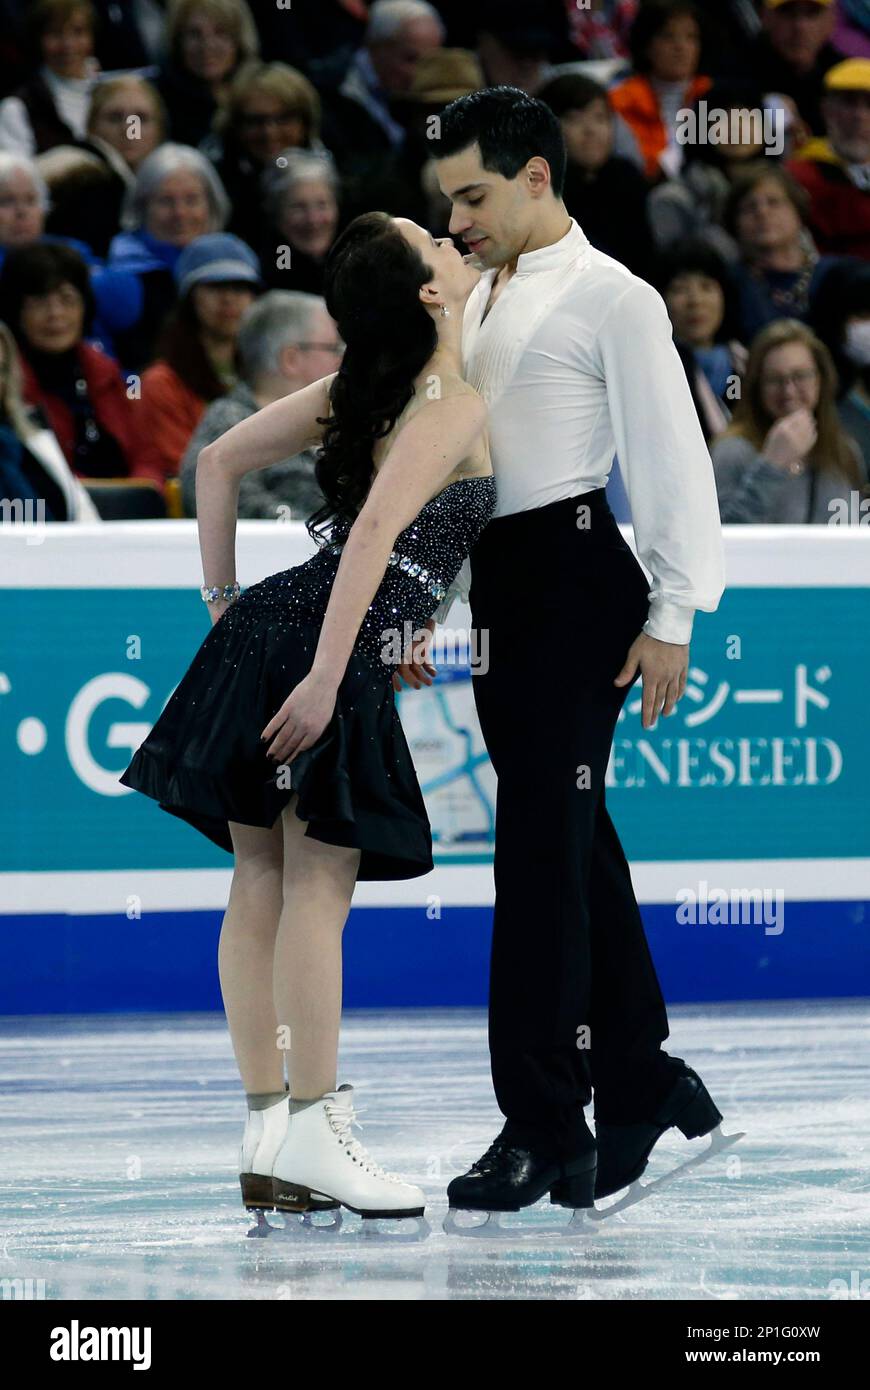 31 March 2016: Anna Cappellini and Luca Lanotte (ITA) during the Ice Dance  Free Skate for the 2016 ISU World Championship at TD Garden in Boston,  Massachusetts. (Photograph by Fred Kfoury III/Icon